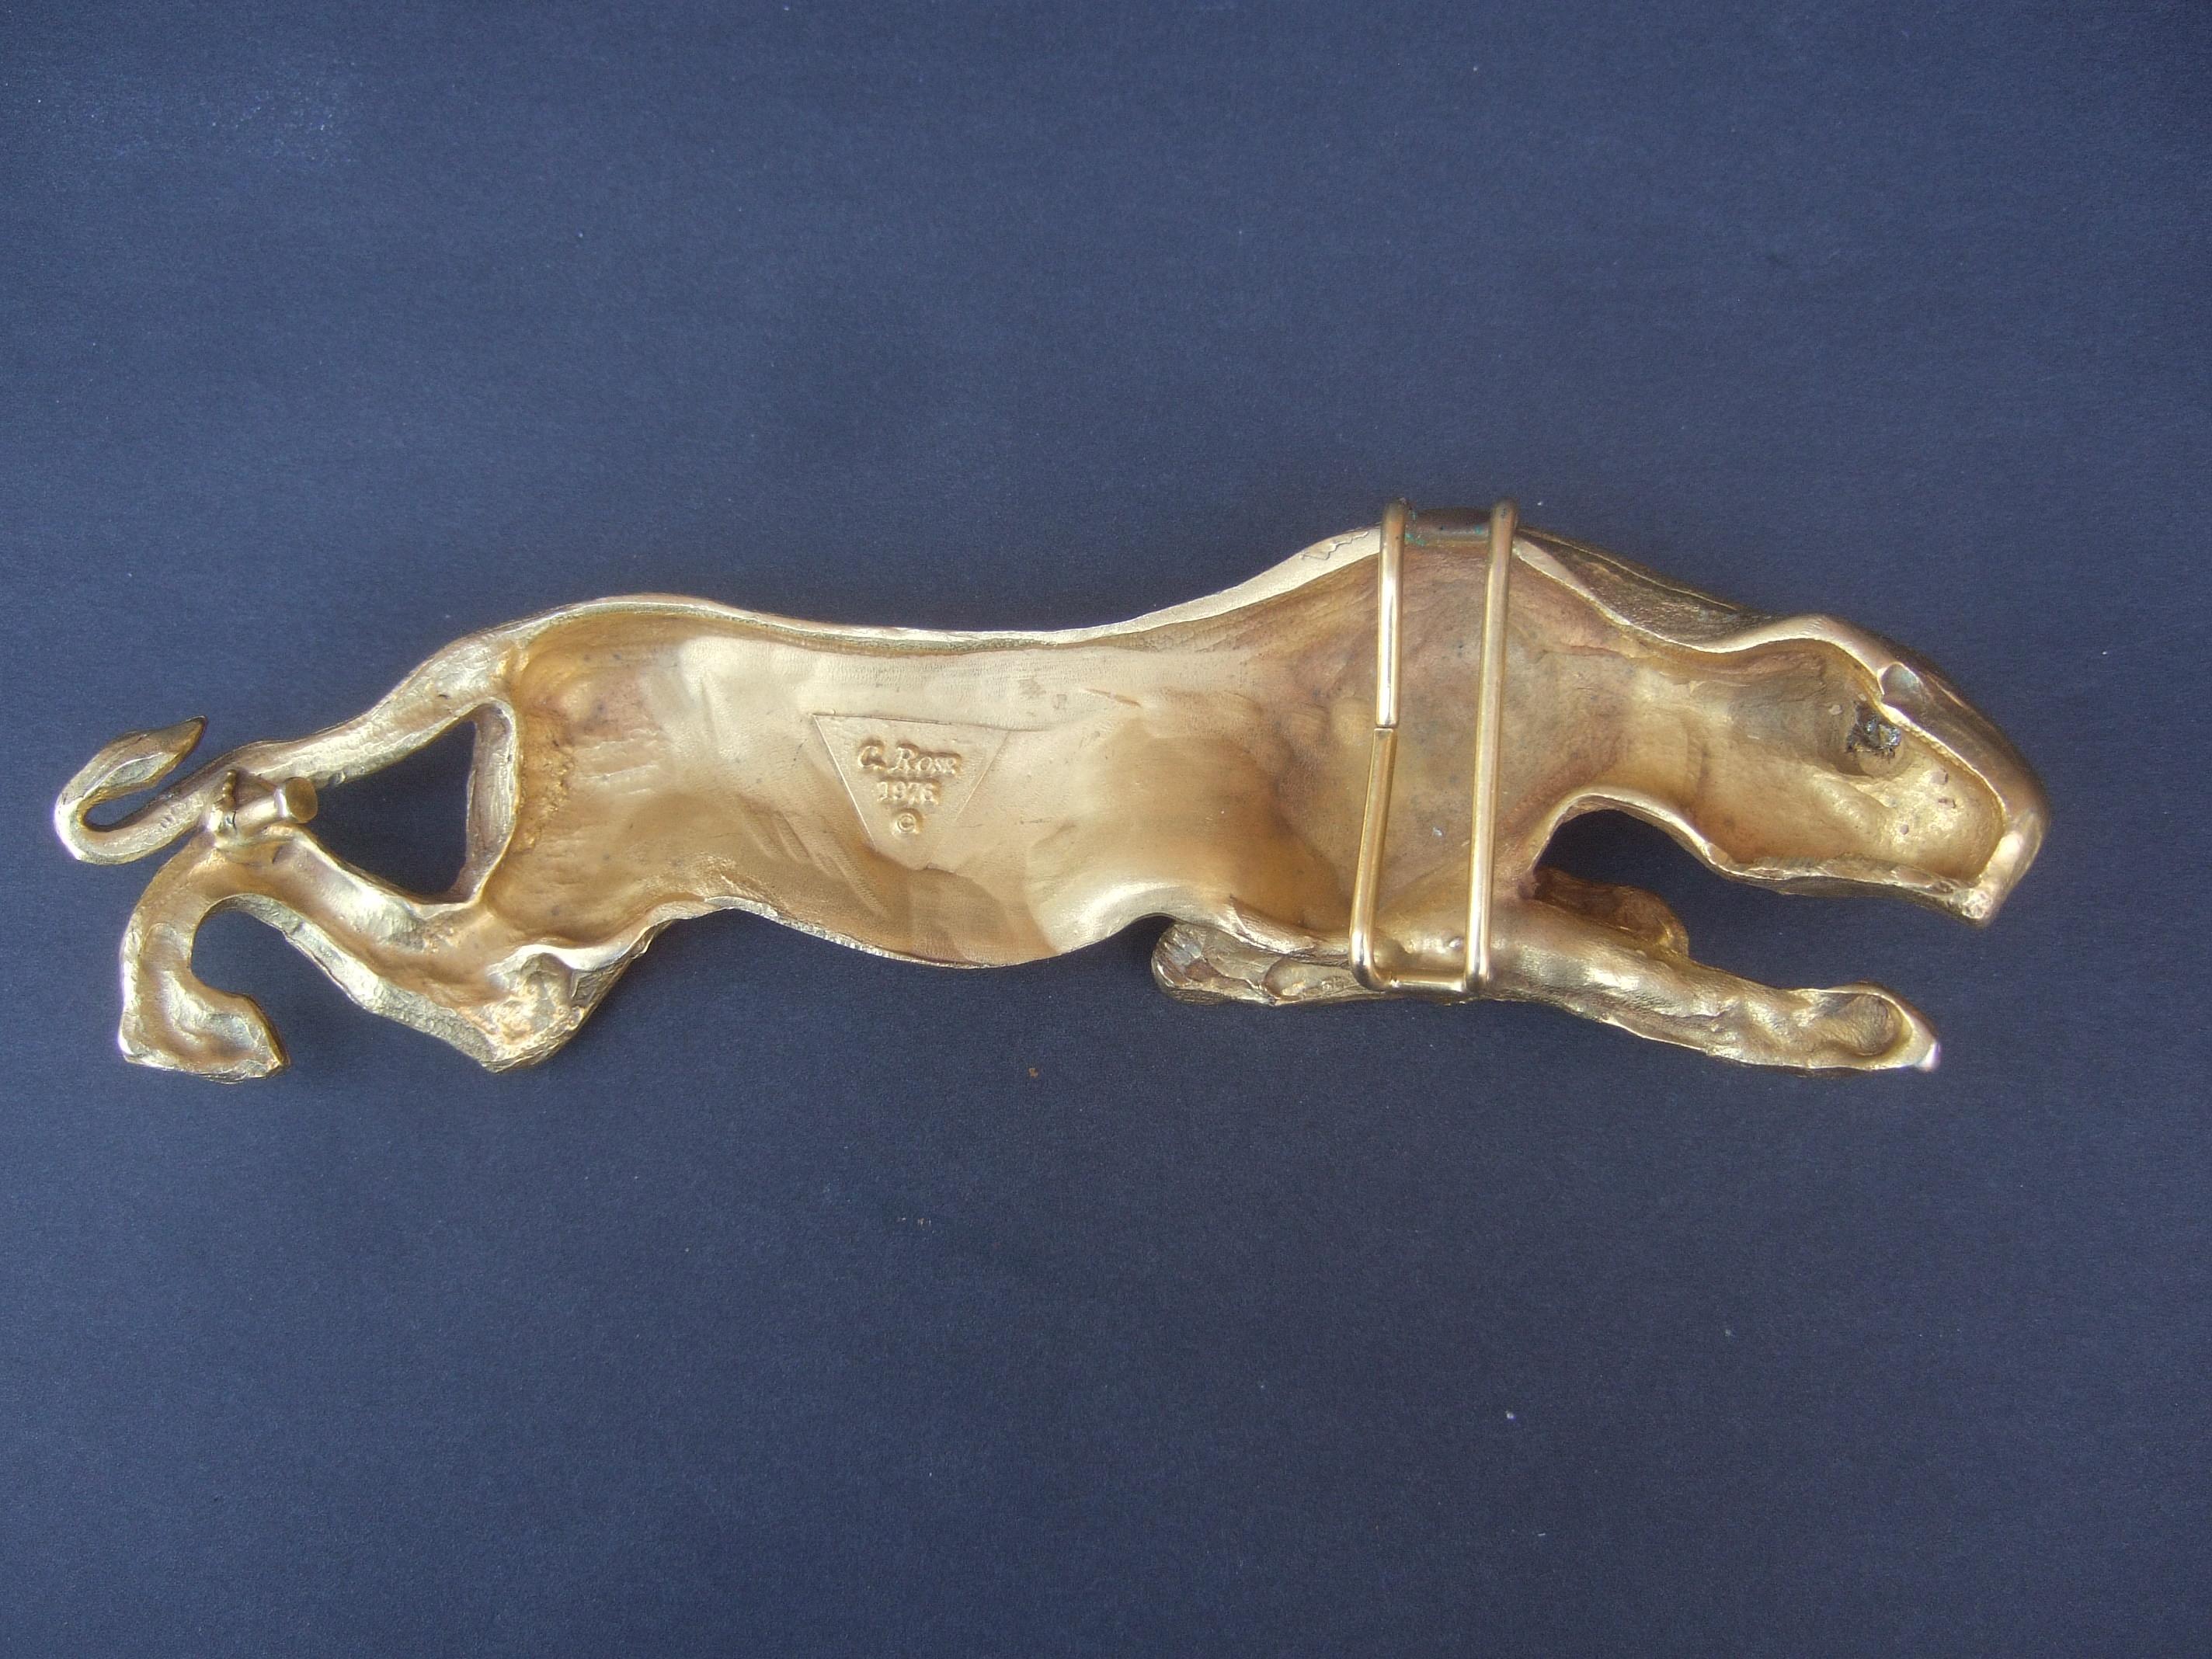 Christopher Ross 24k Gold Plated Panther Belt Buckle circa 1976  3